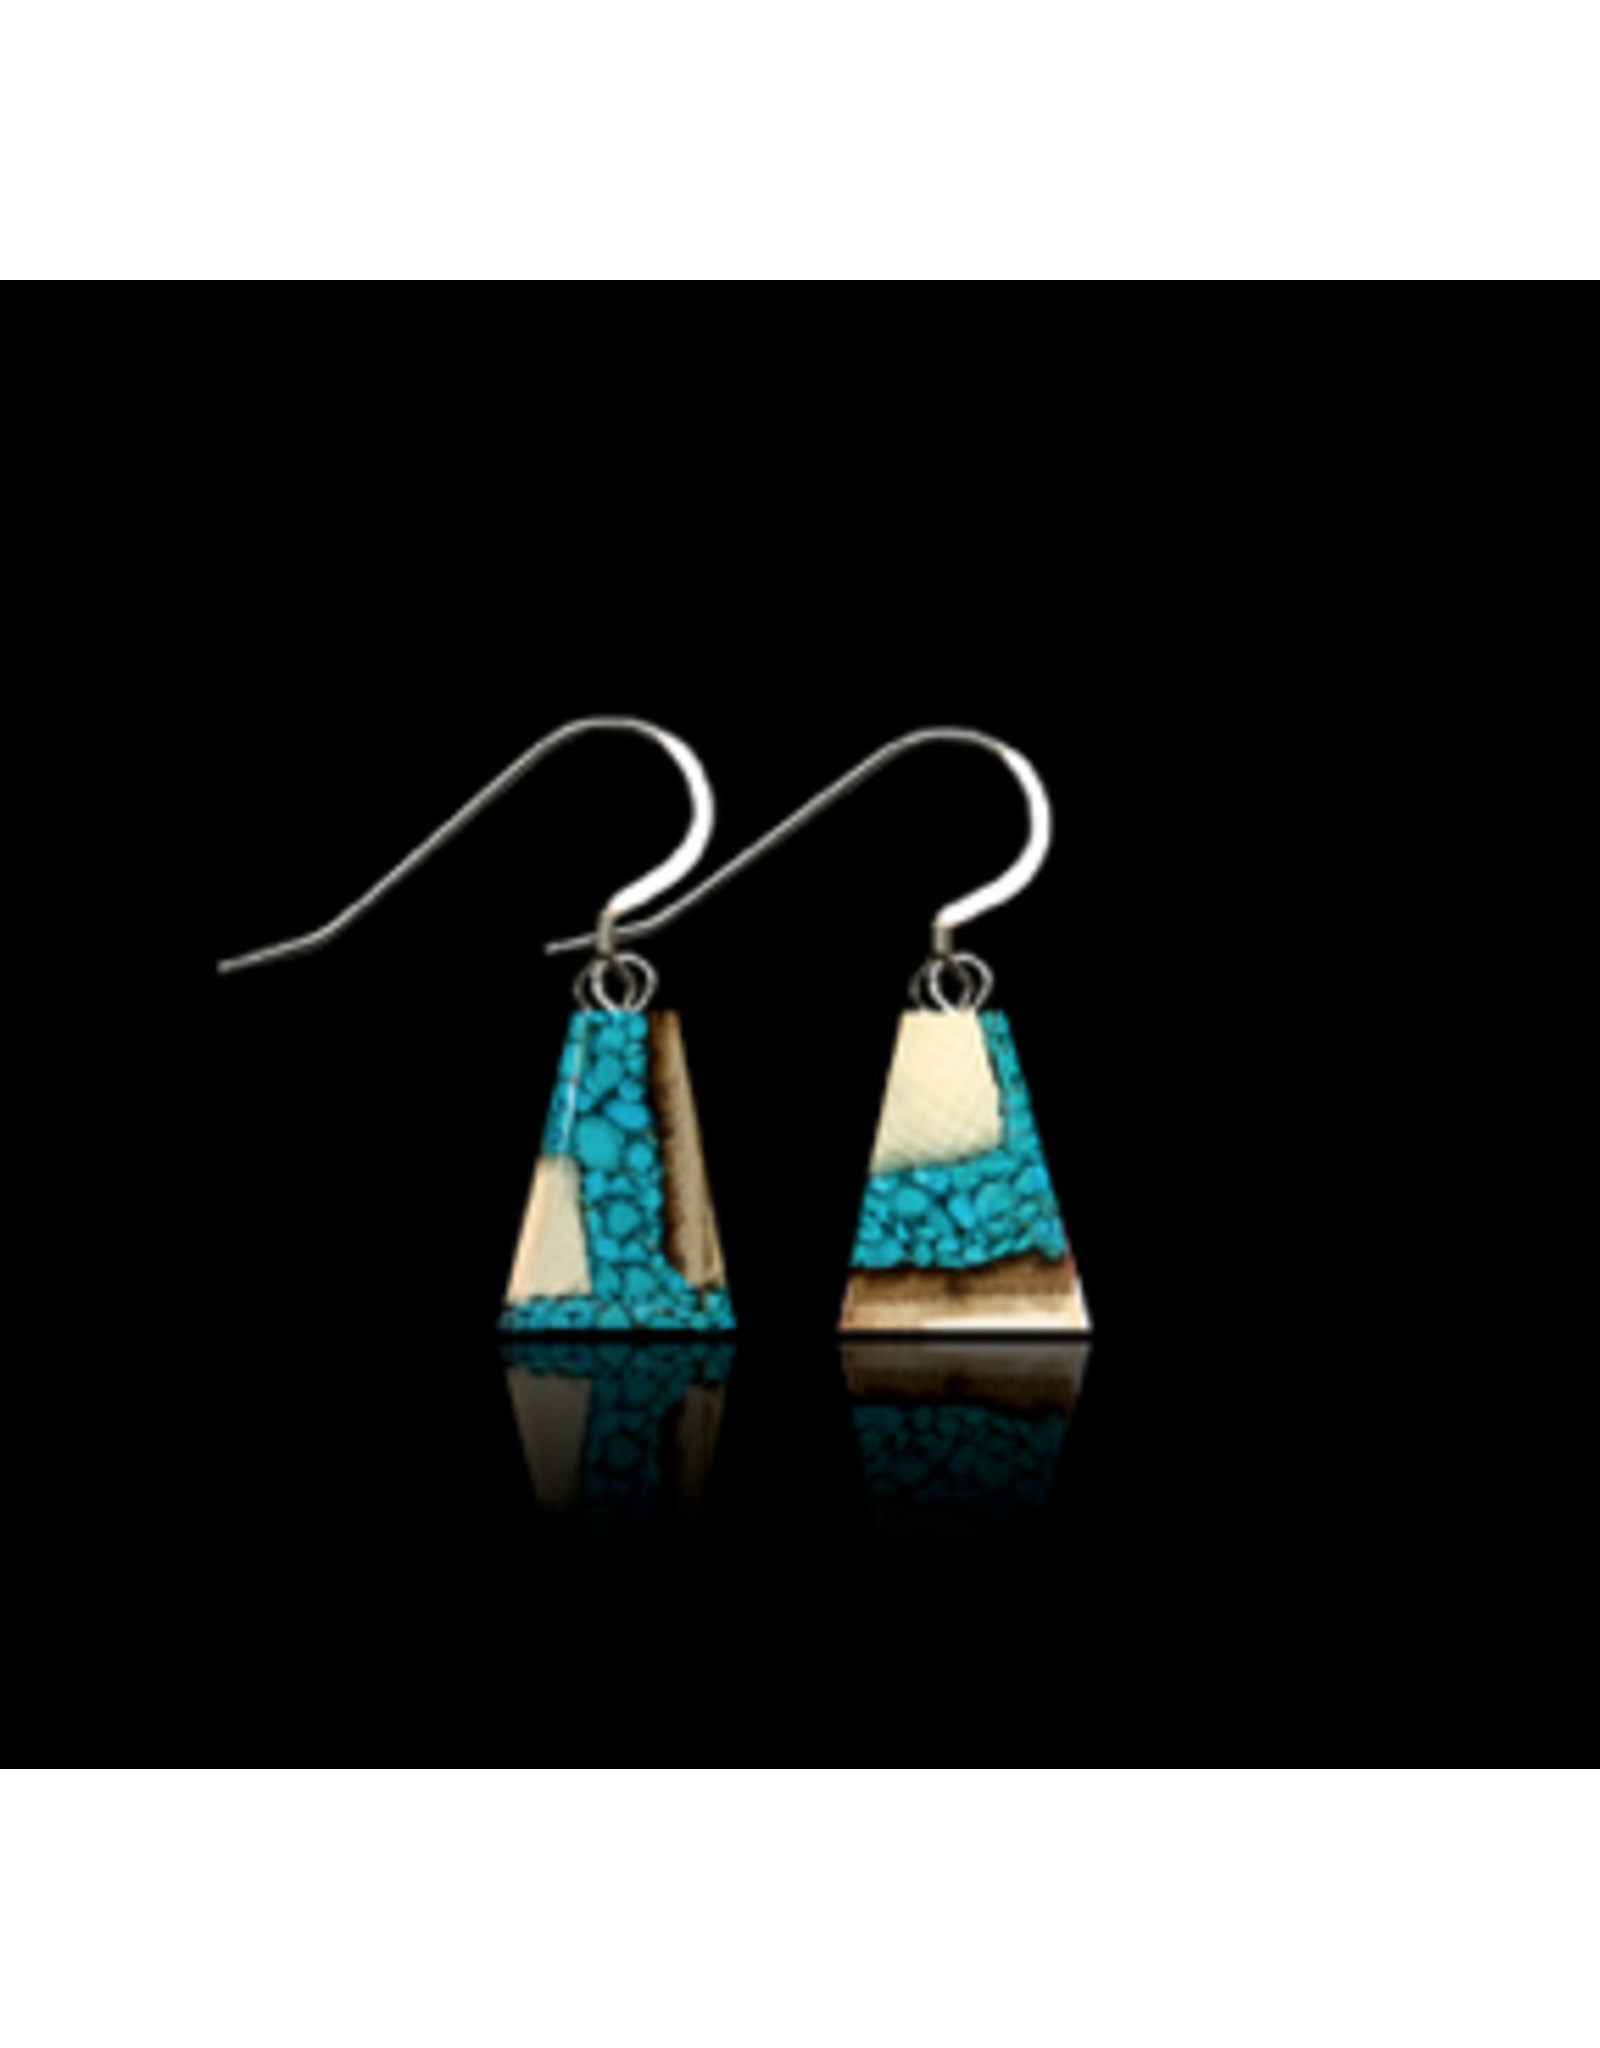 Dima Flare Earrings Mammoth Ivory & Turquoise - DFT3